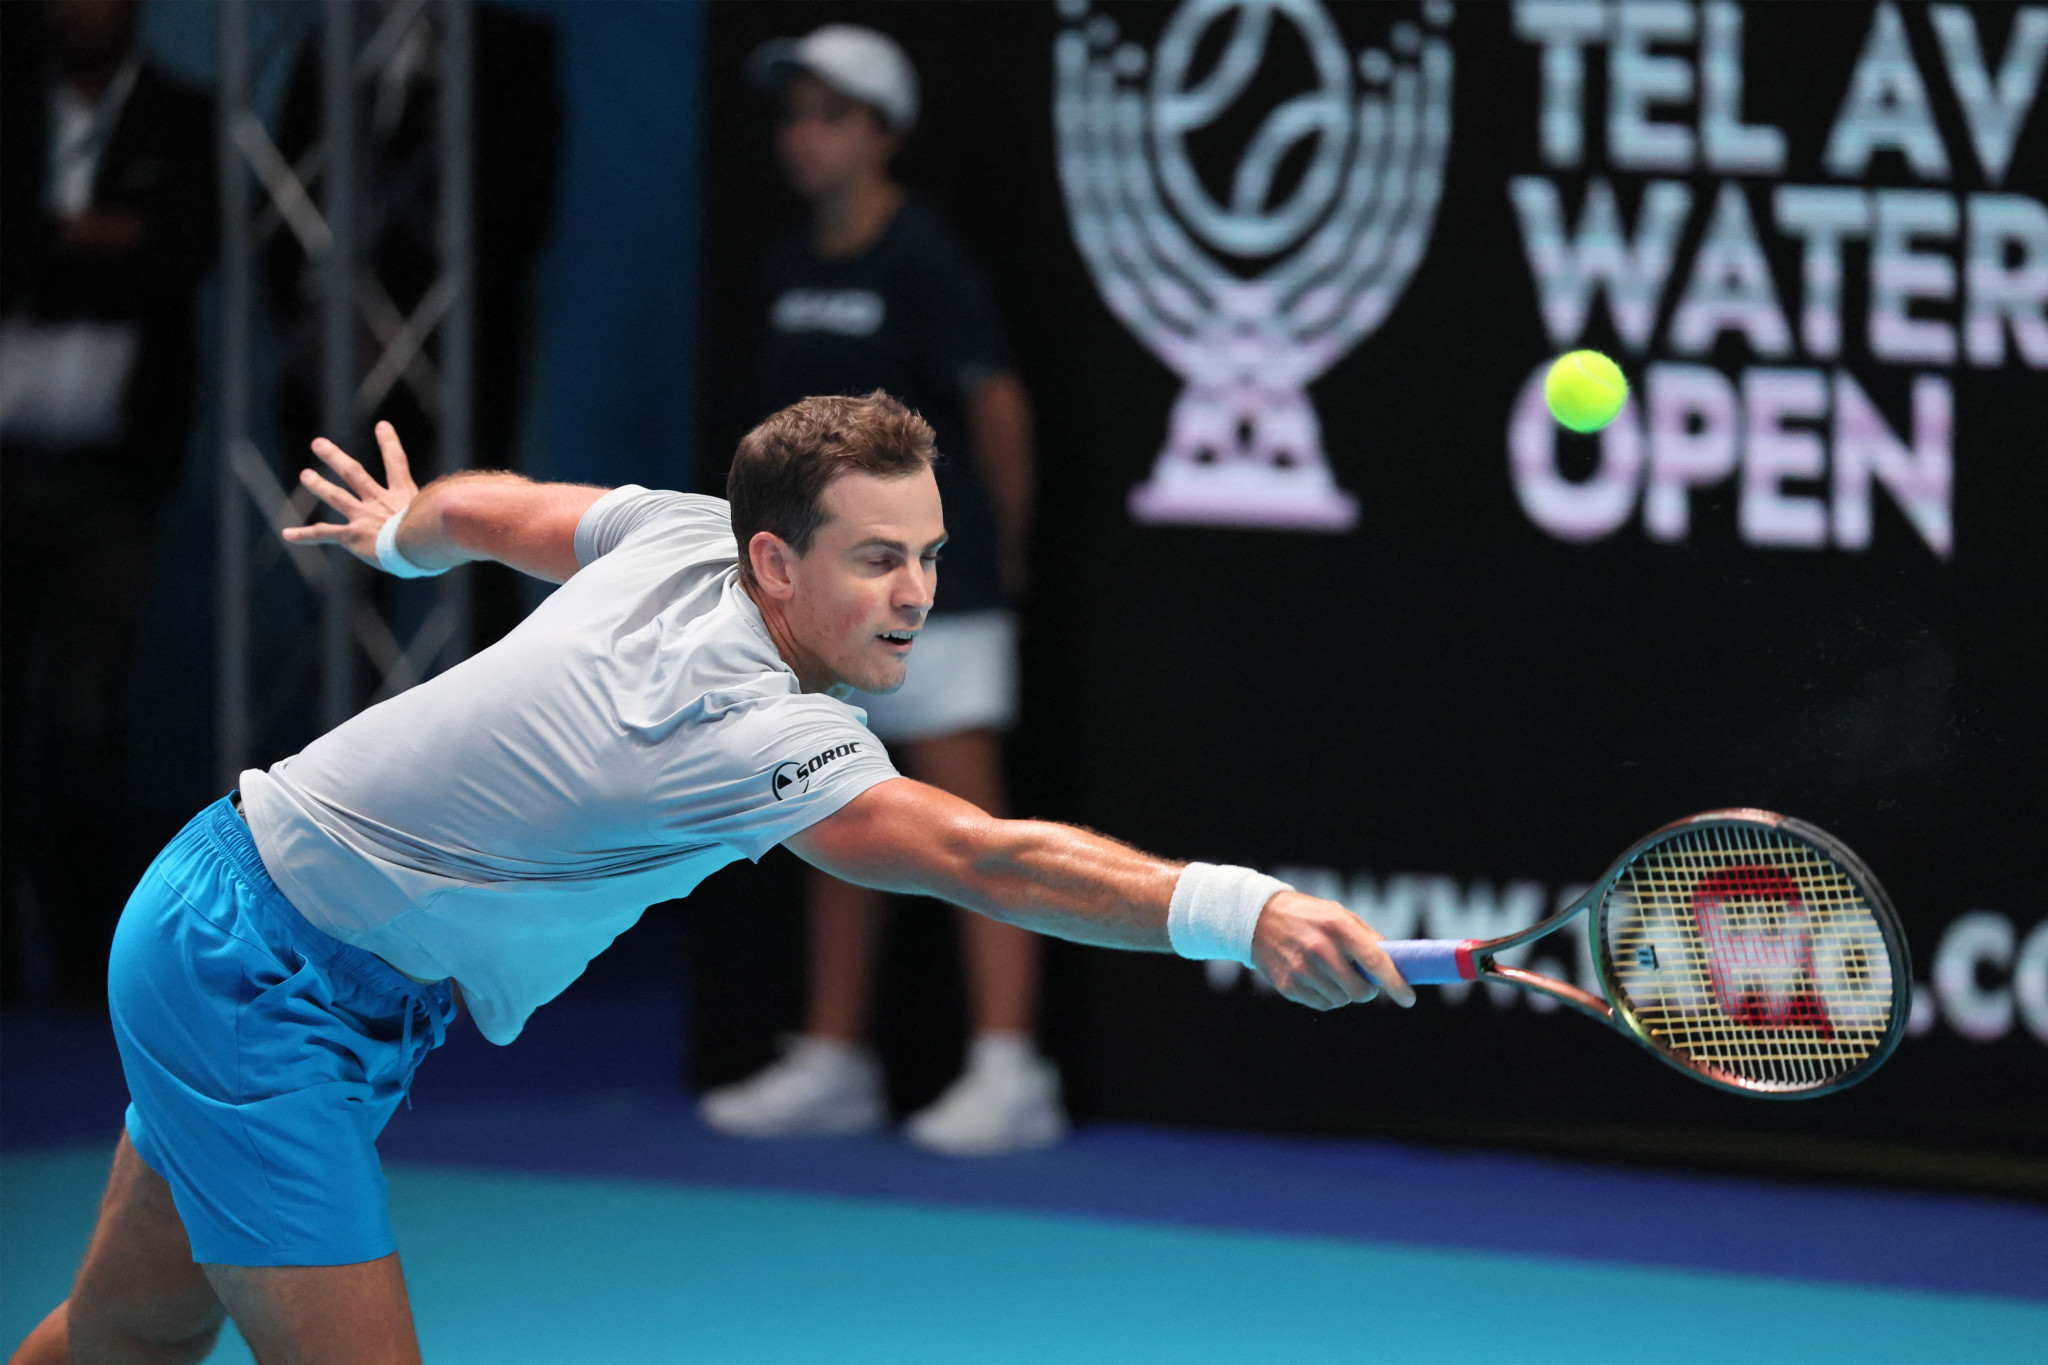 Tel Aviv Watergen Open cancelled due to Israel conflict